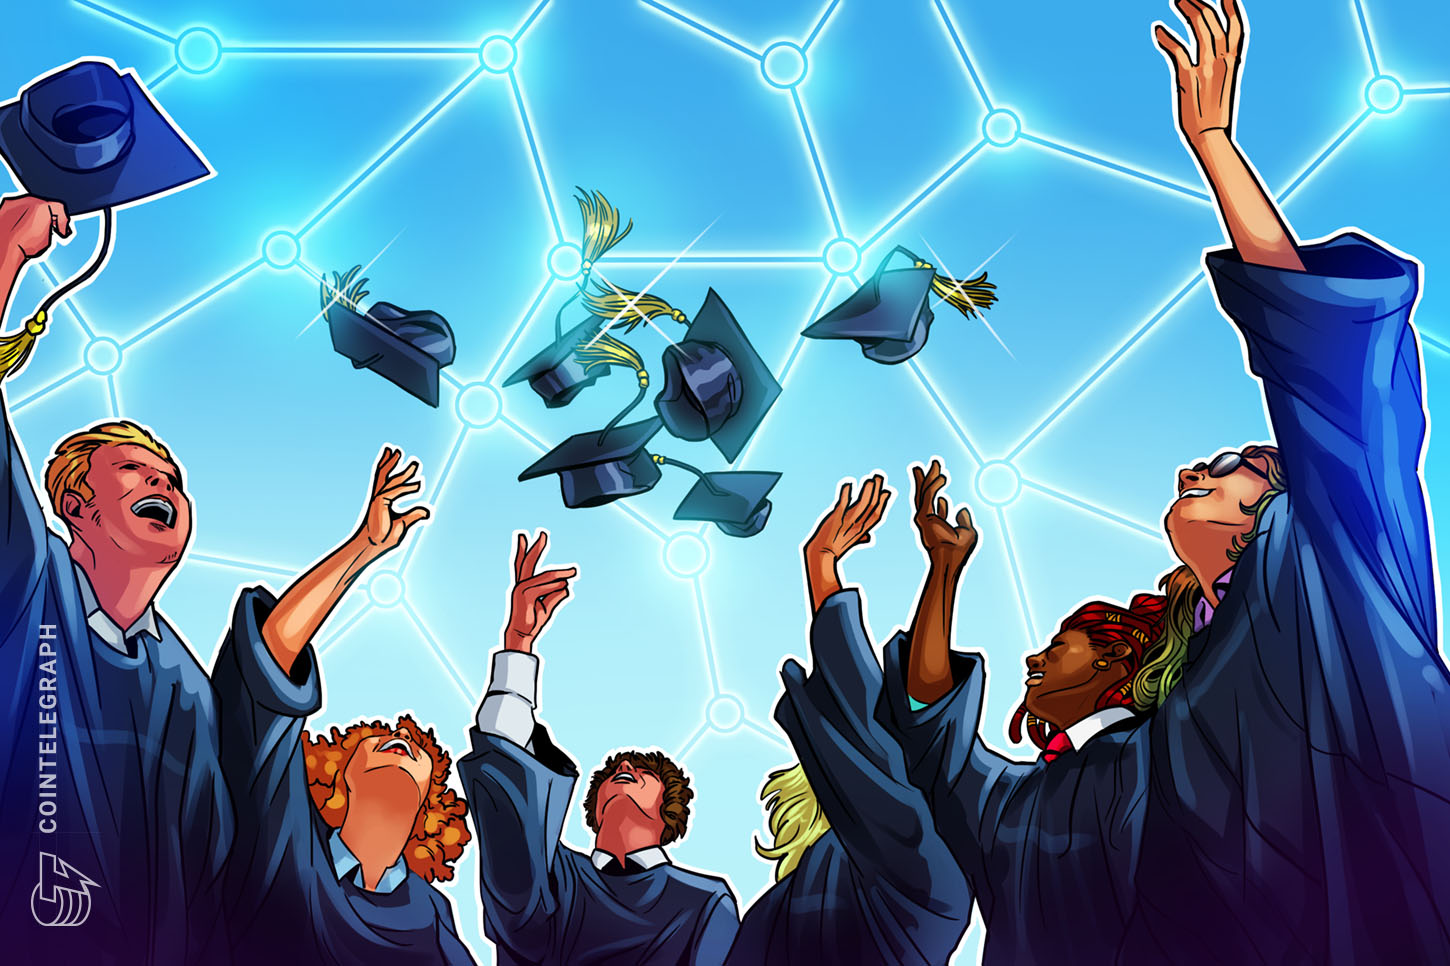 Vietnam’s ministry of schooling to report certifications on blockchain